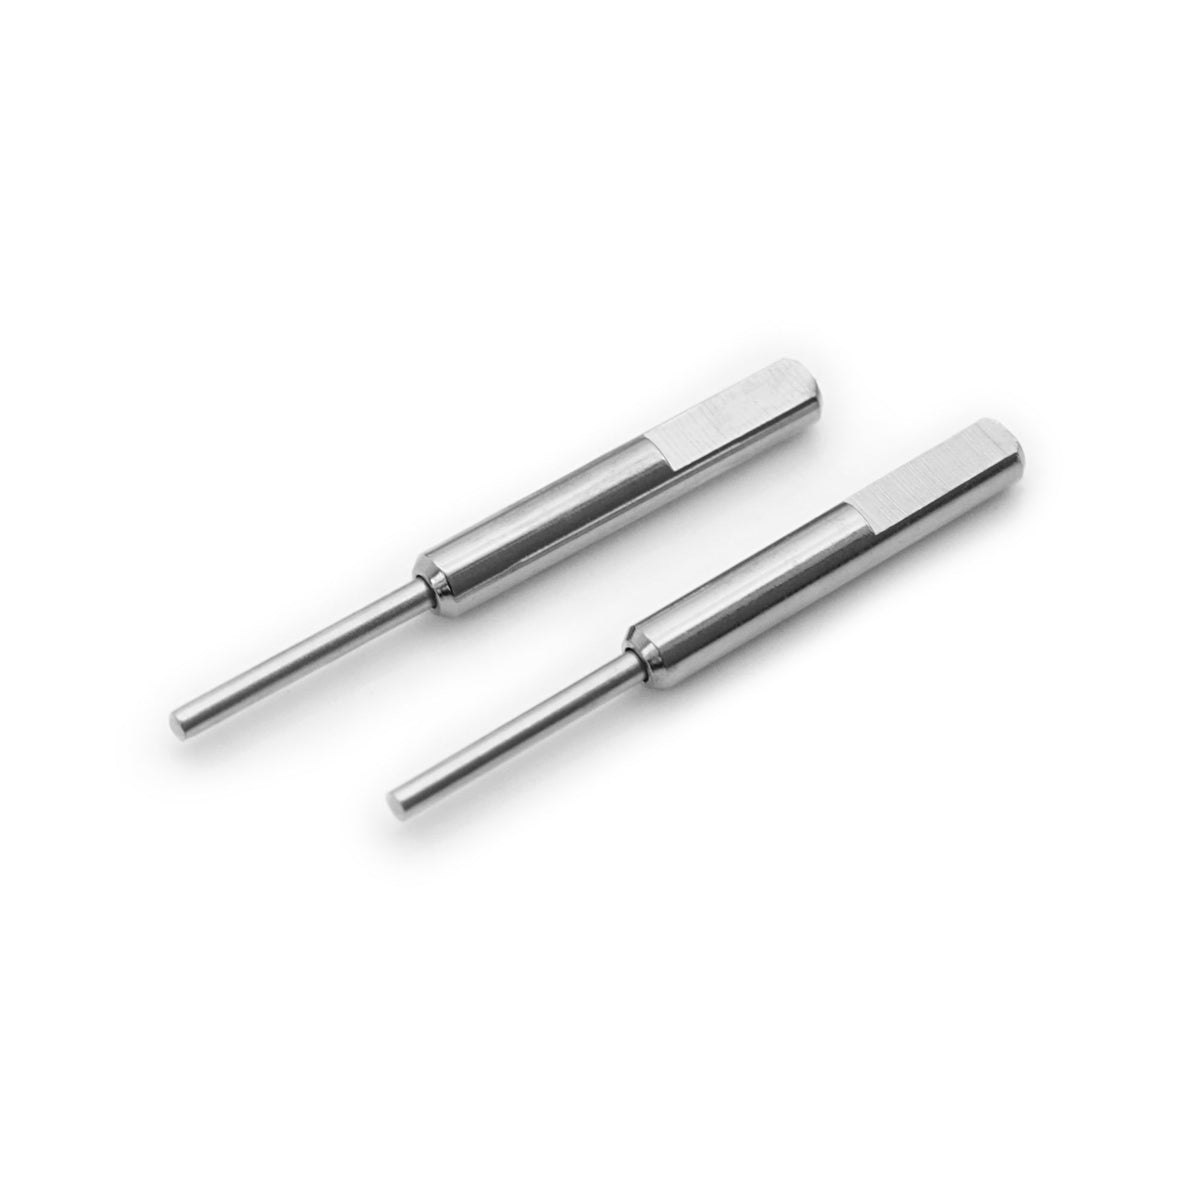 8mm Replacement Punch Pins - 2 pcs for Watch Band Double-headed Pin Punch Pin Extractor Strapcode Watch Bands